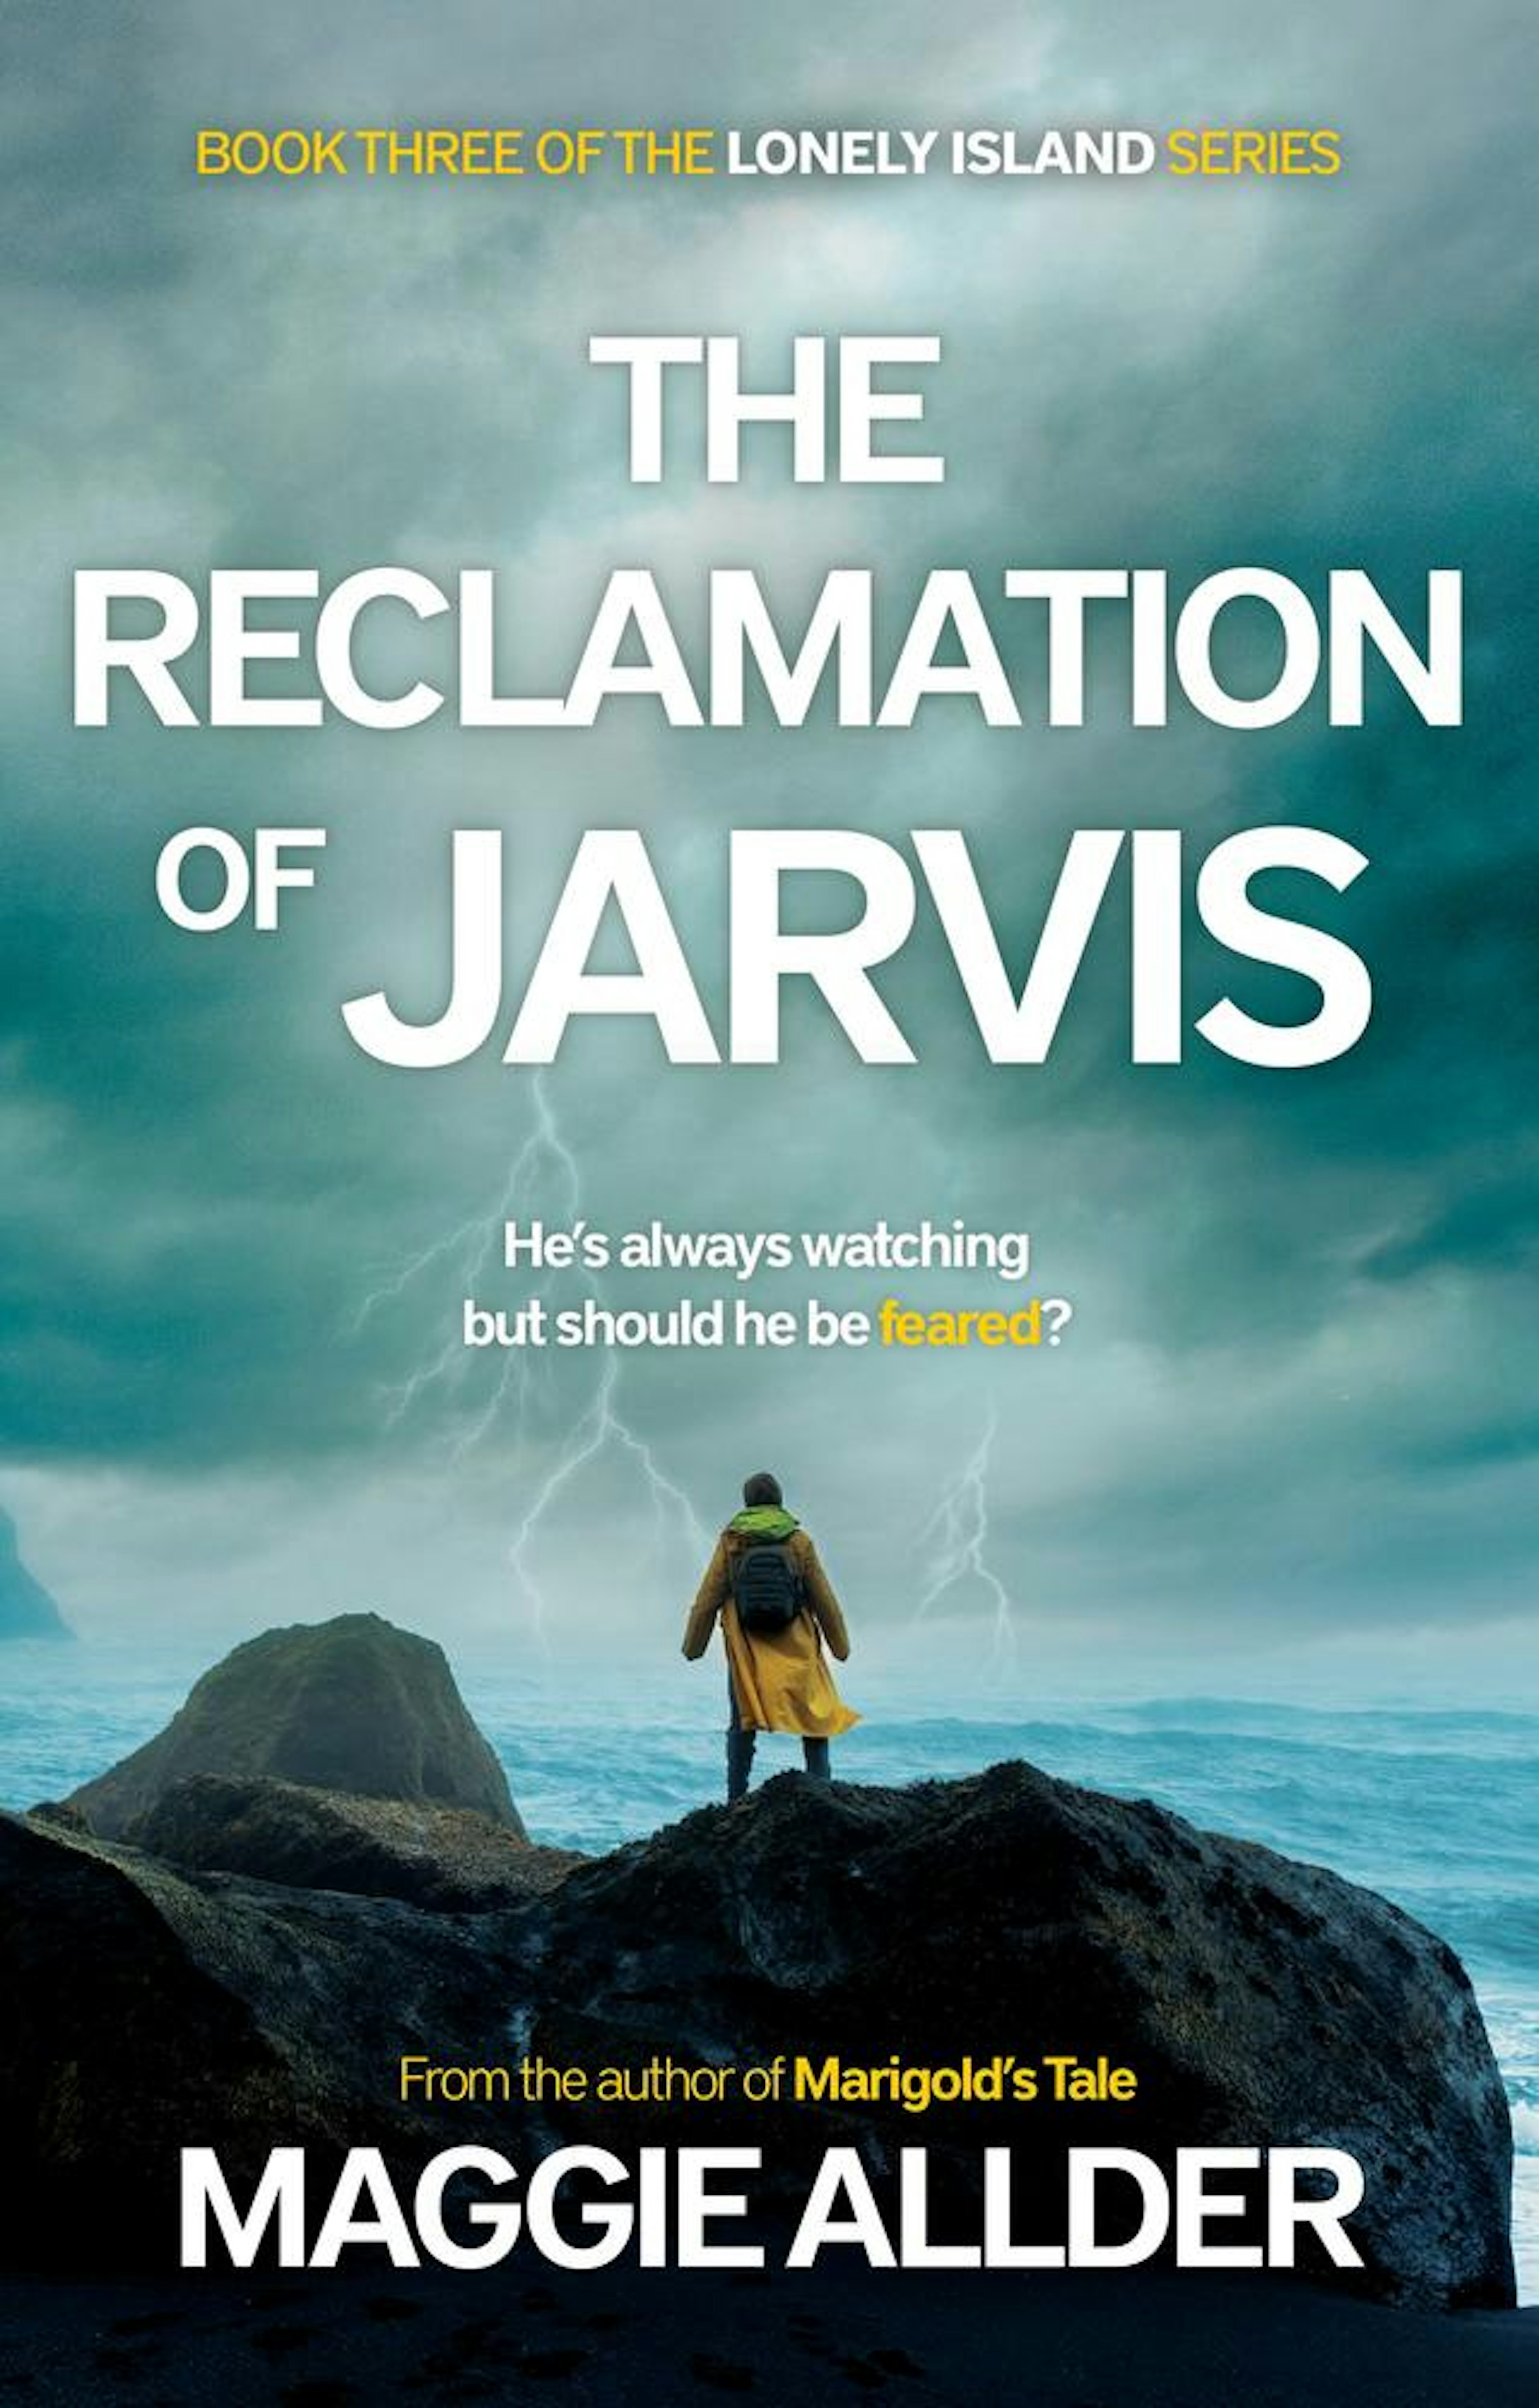 The Reclamation of Jarvis